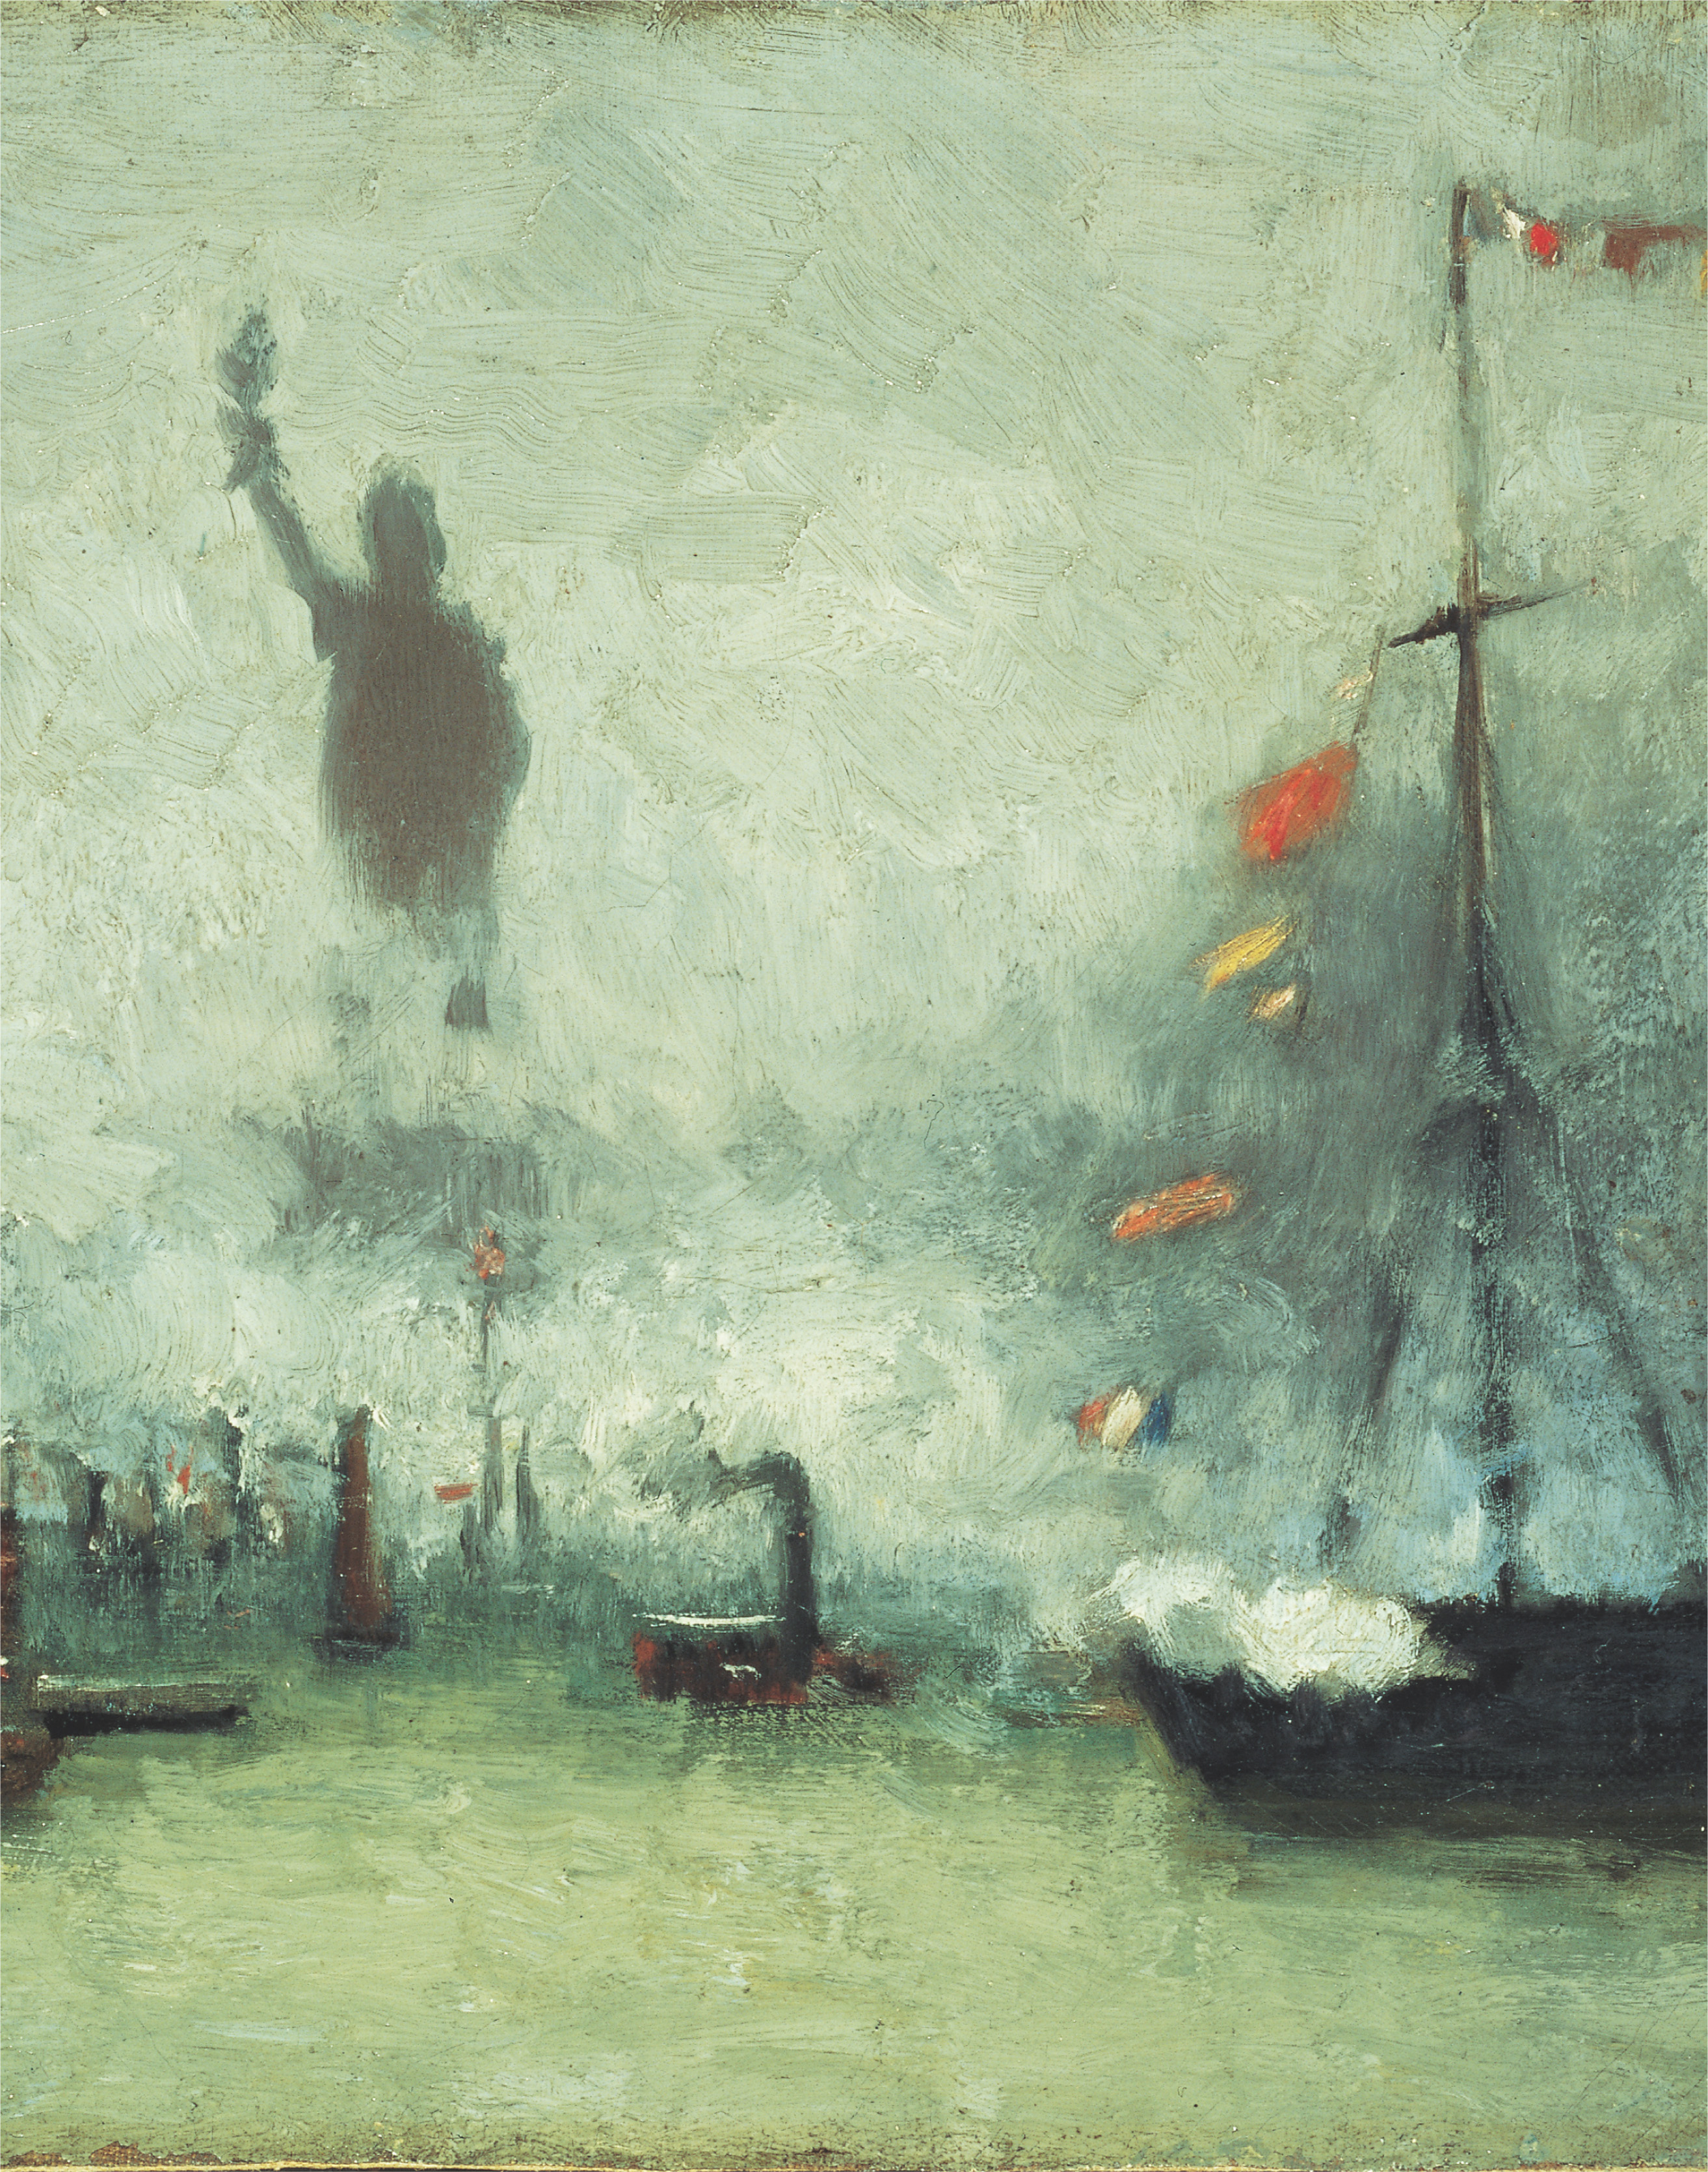 Painting: The Statue of Liberty